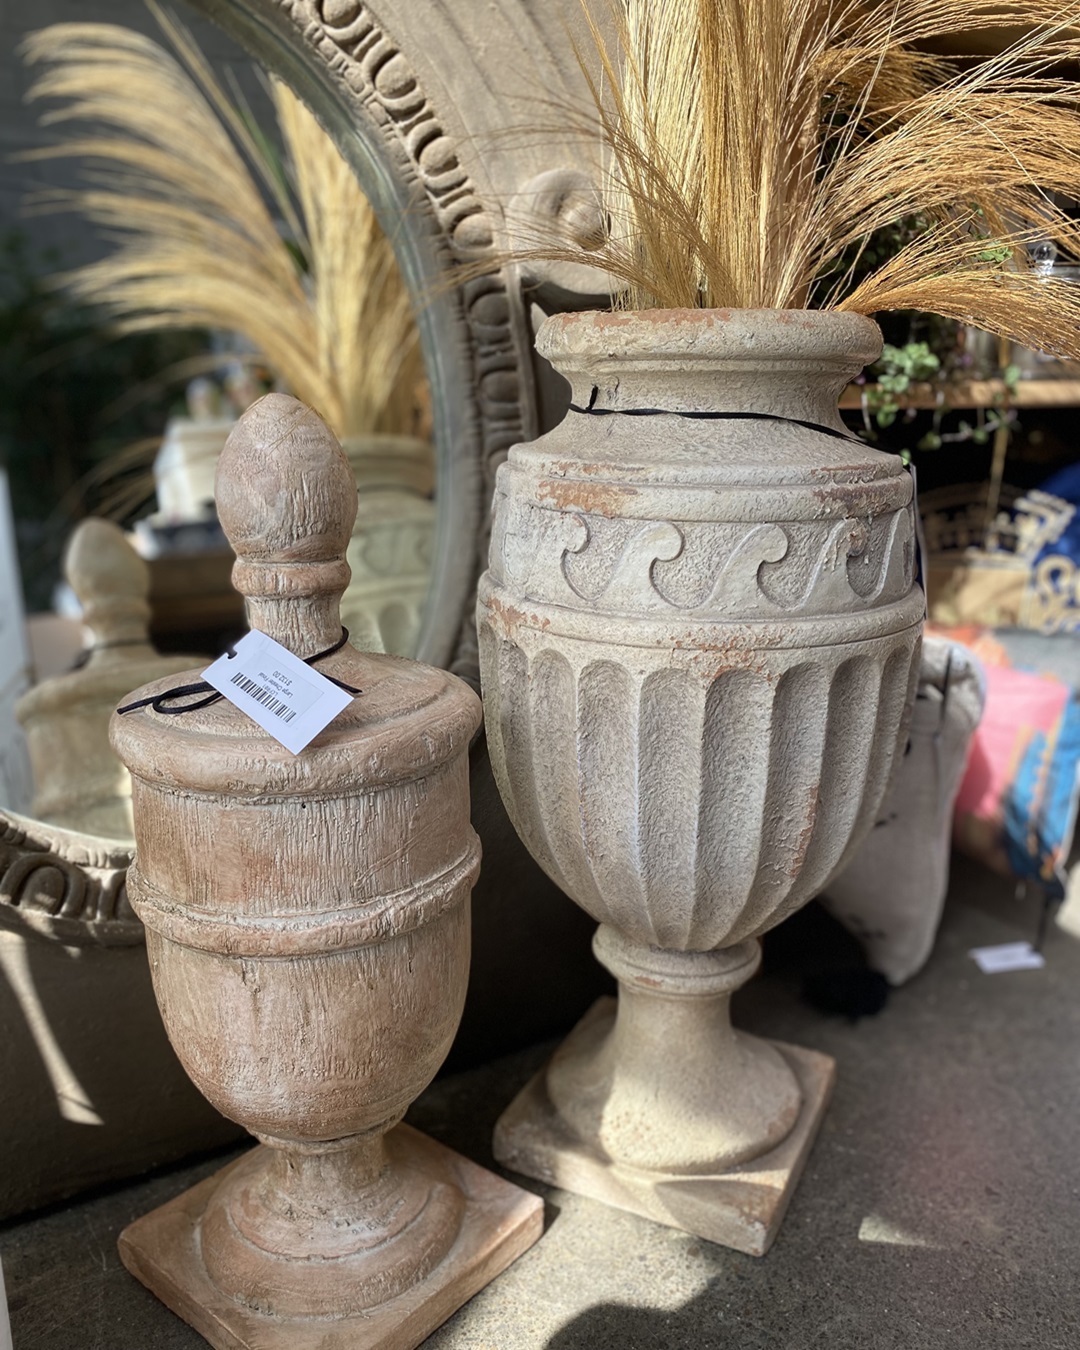 Vintage antique urn with grass in it next to another urn on floor